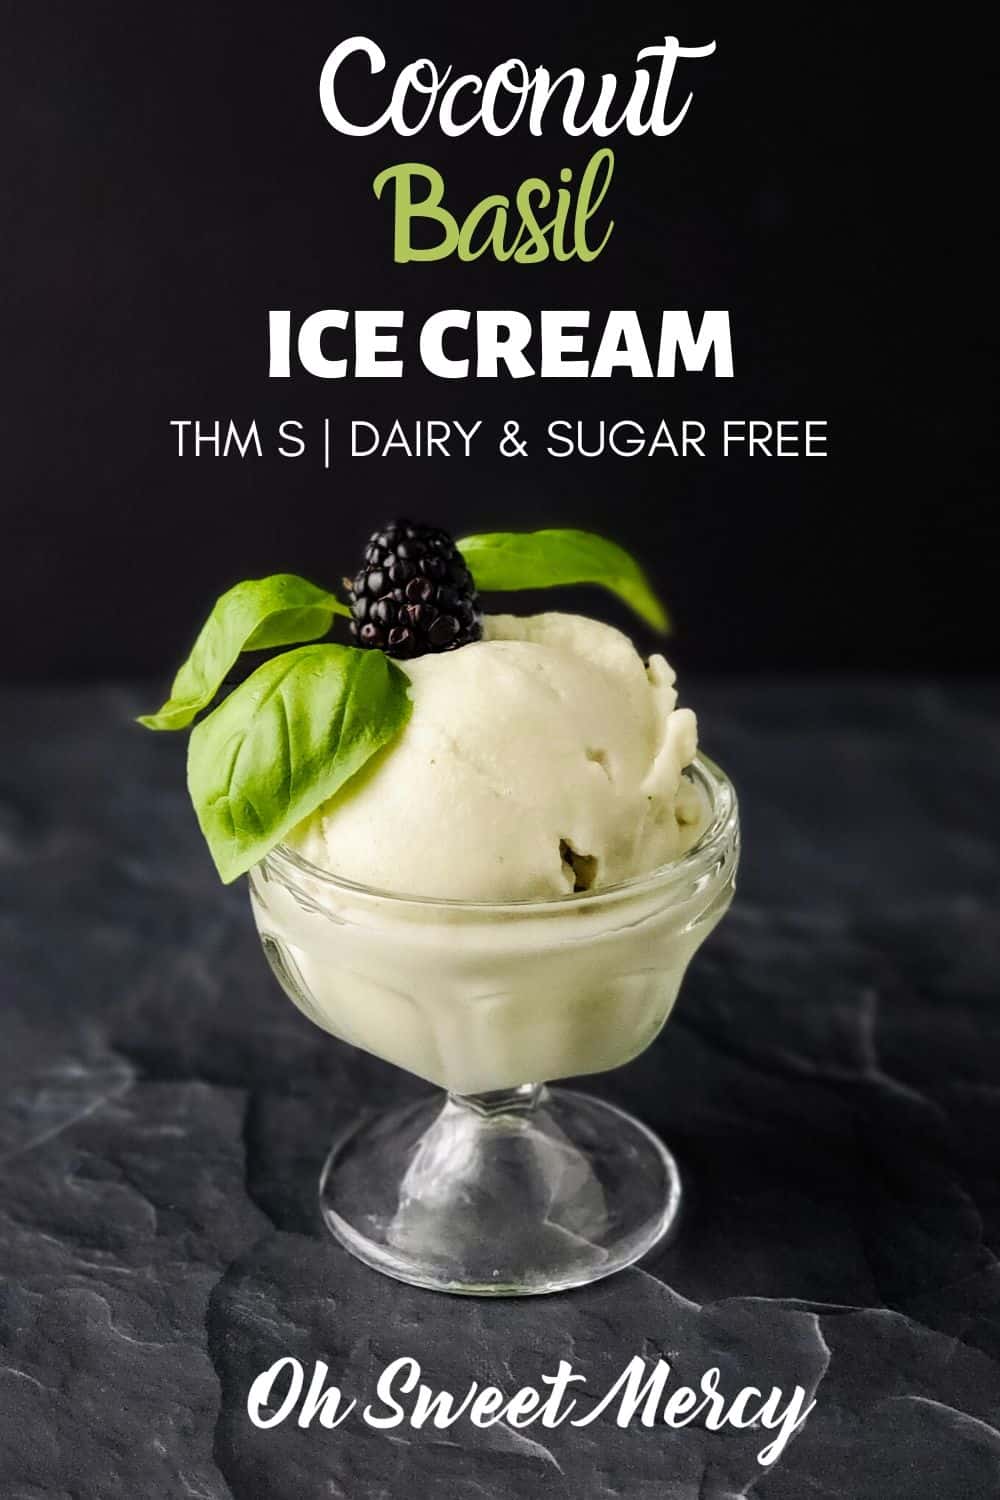 My low carb and sugar free Coconut Basil Ice Cream is surprisingly delicious! Use fresh basil for best flavor but in a pinch dried will work too. #thm #icecream #recipes #basil #coconut #vegan #lowcarb #sugarfree #dairyfree